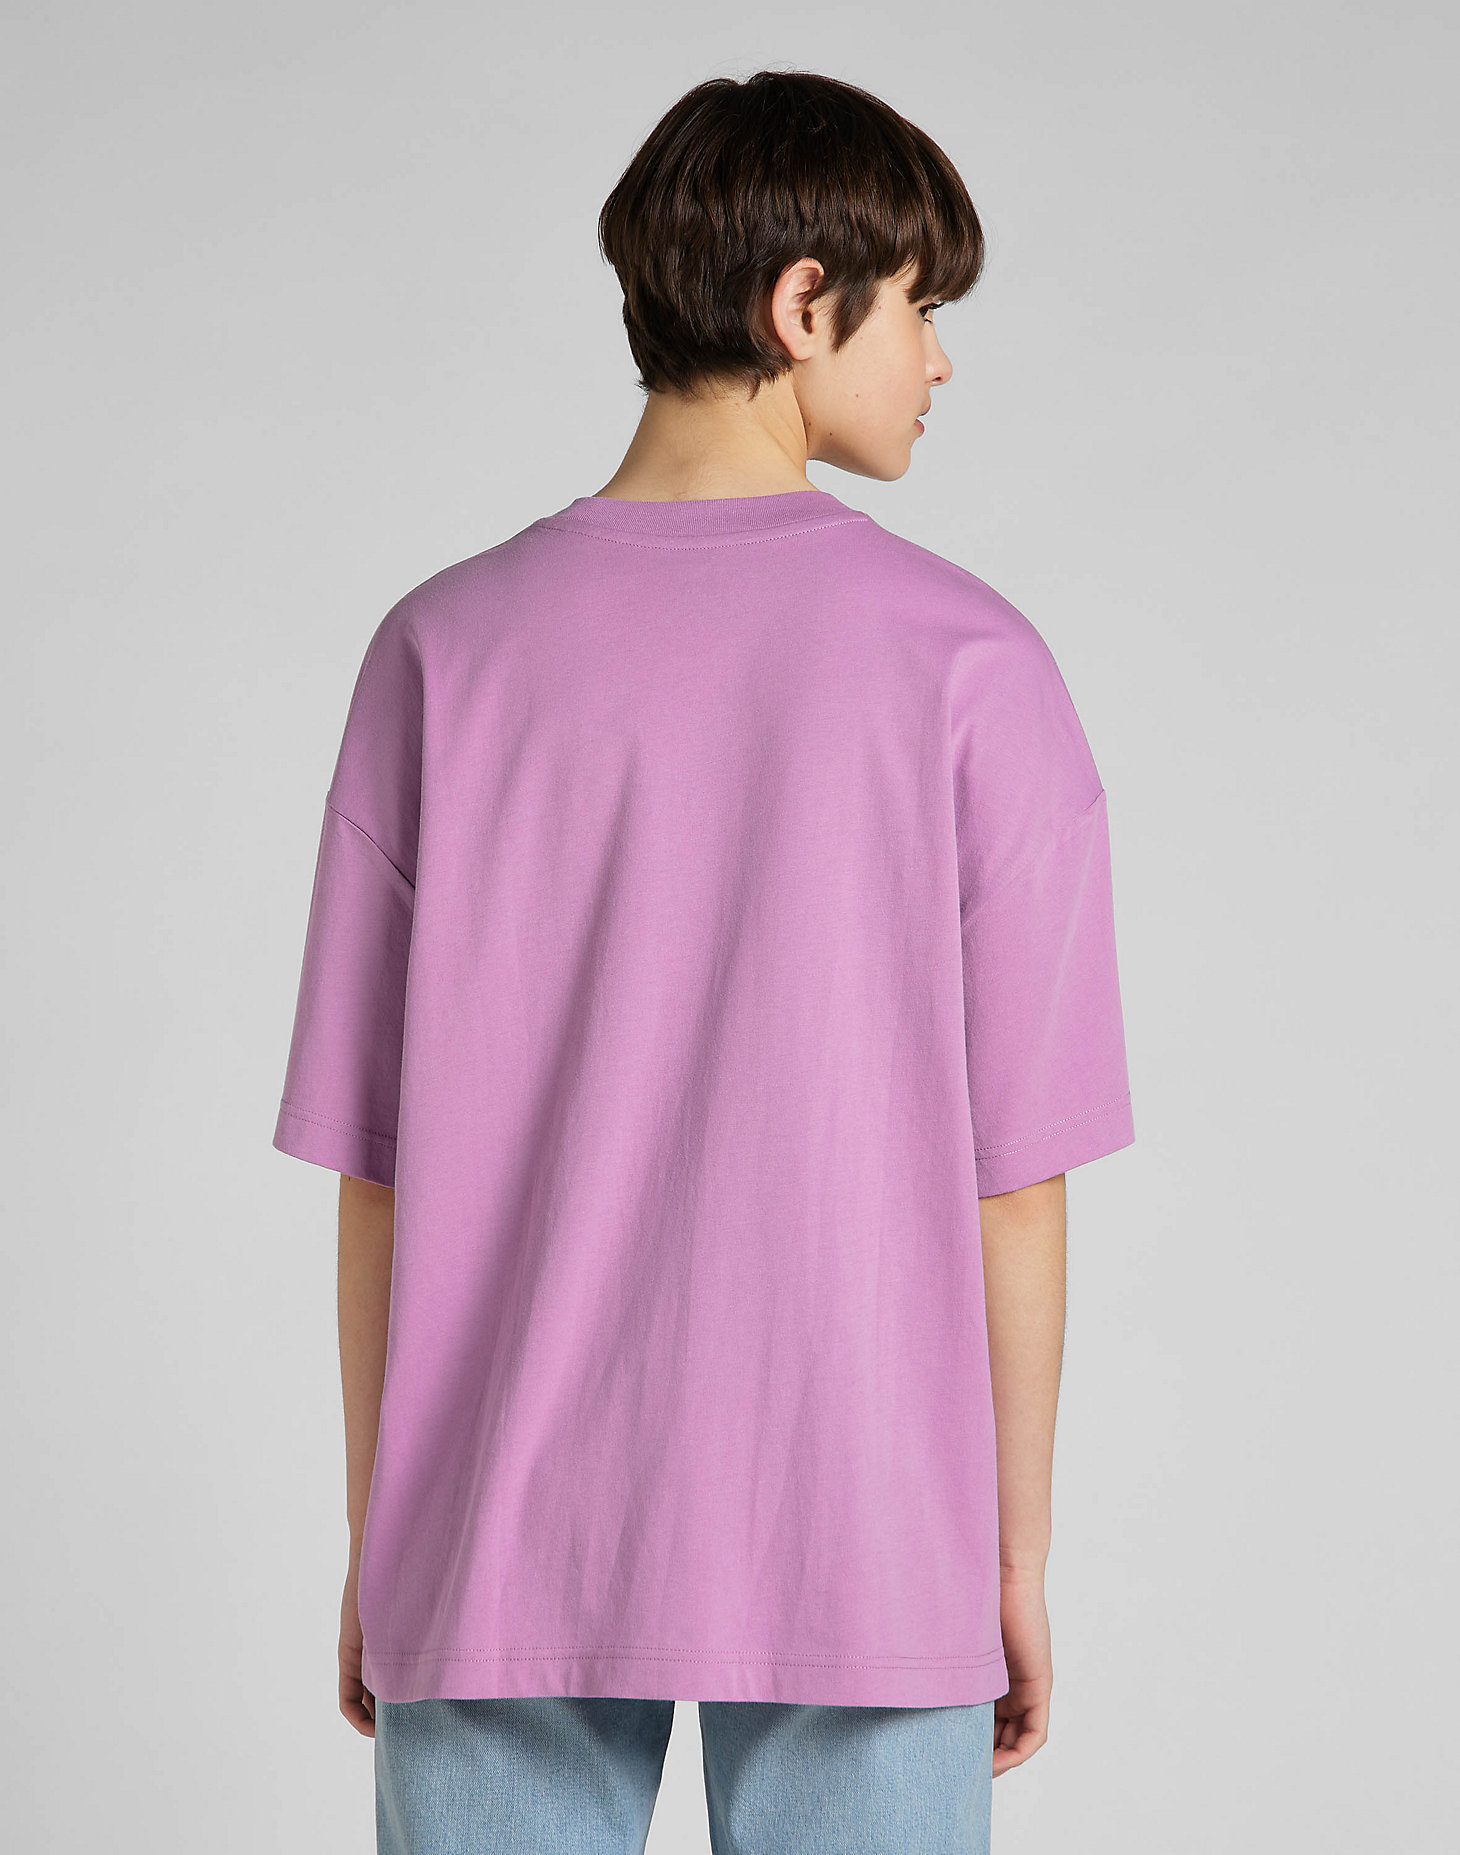 Funnel Neck Long Sleeve in Pansy alternative view 1